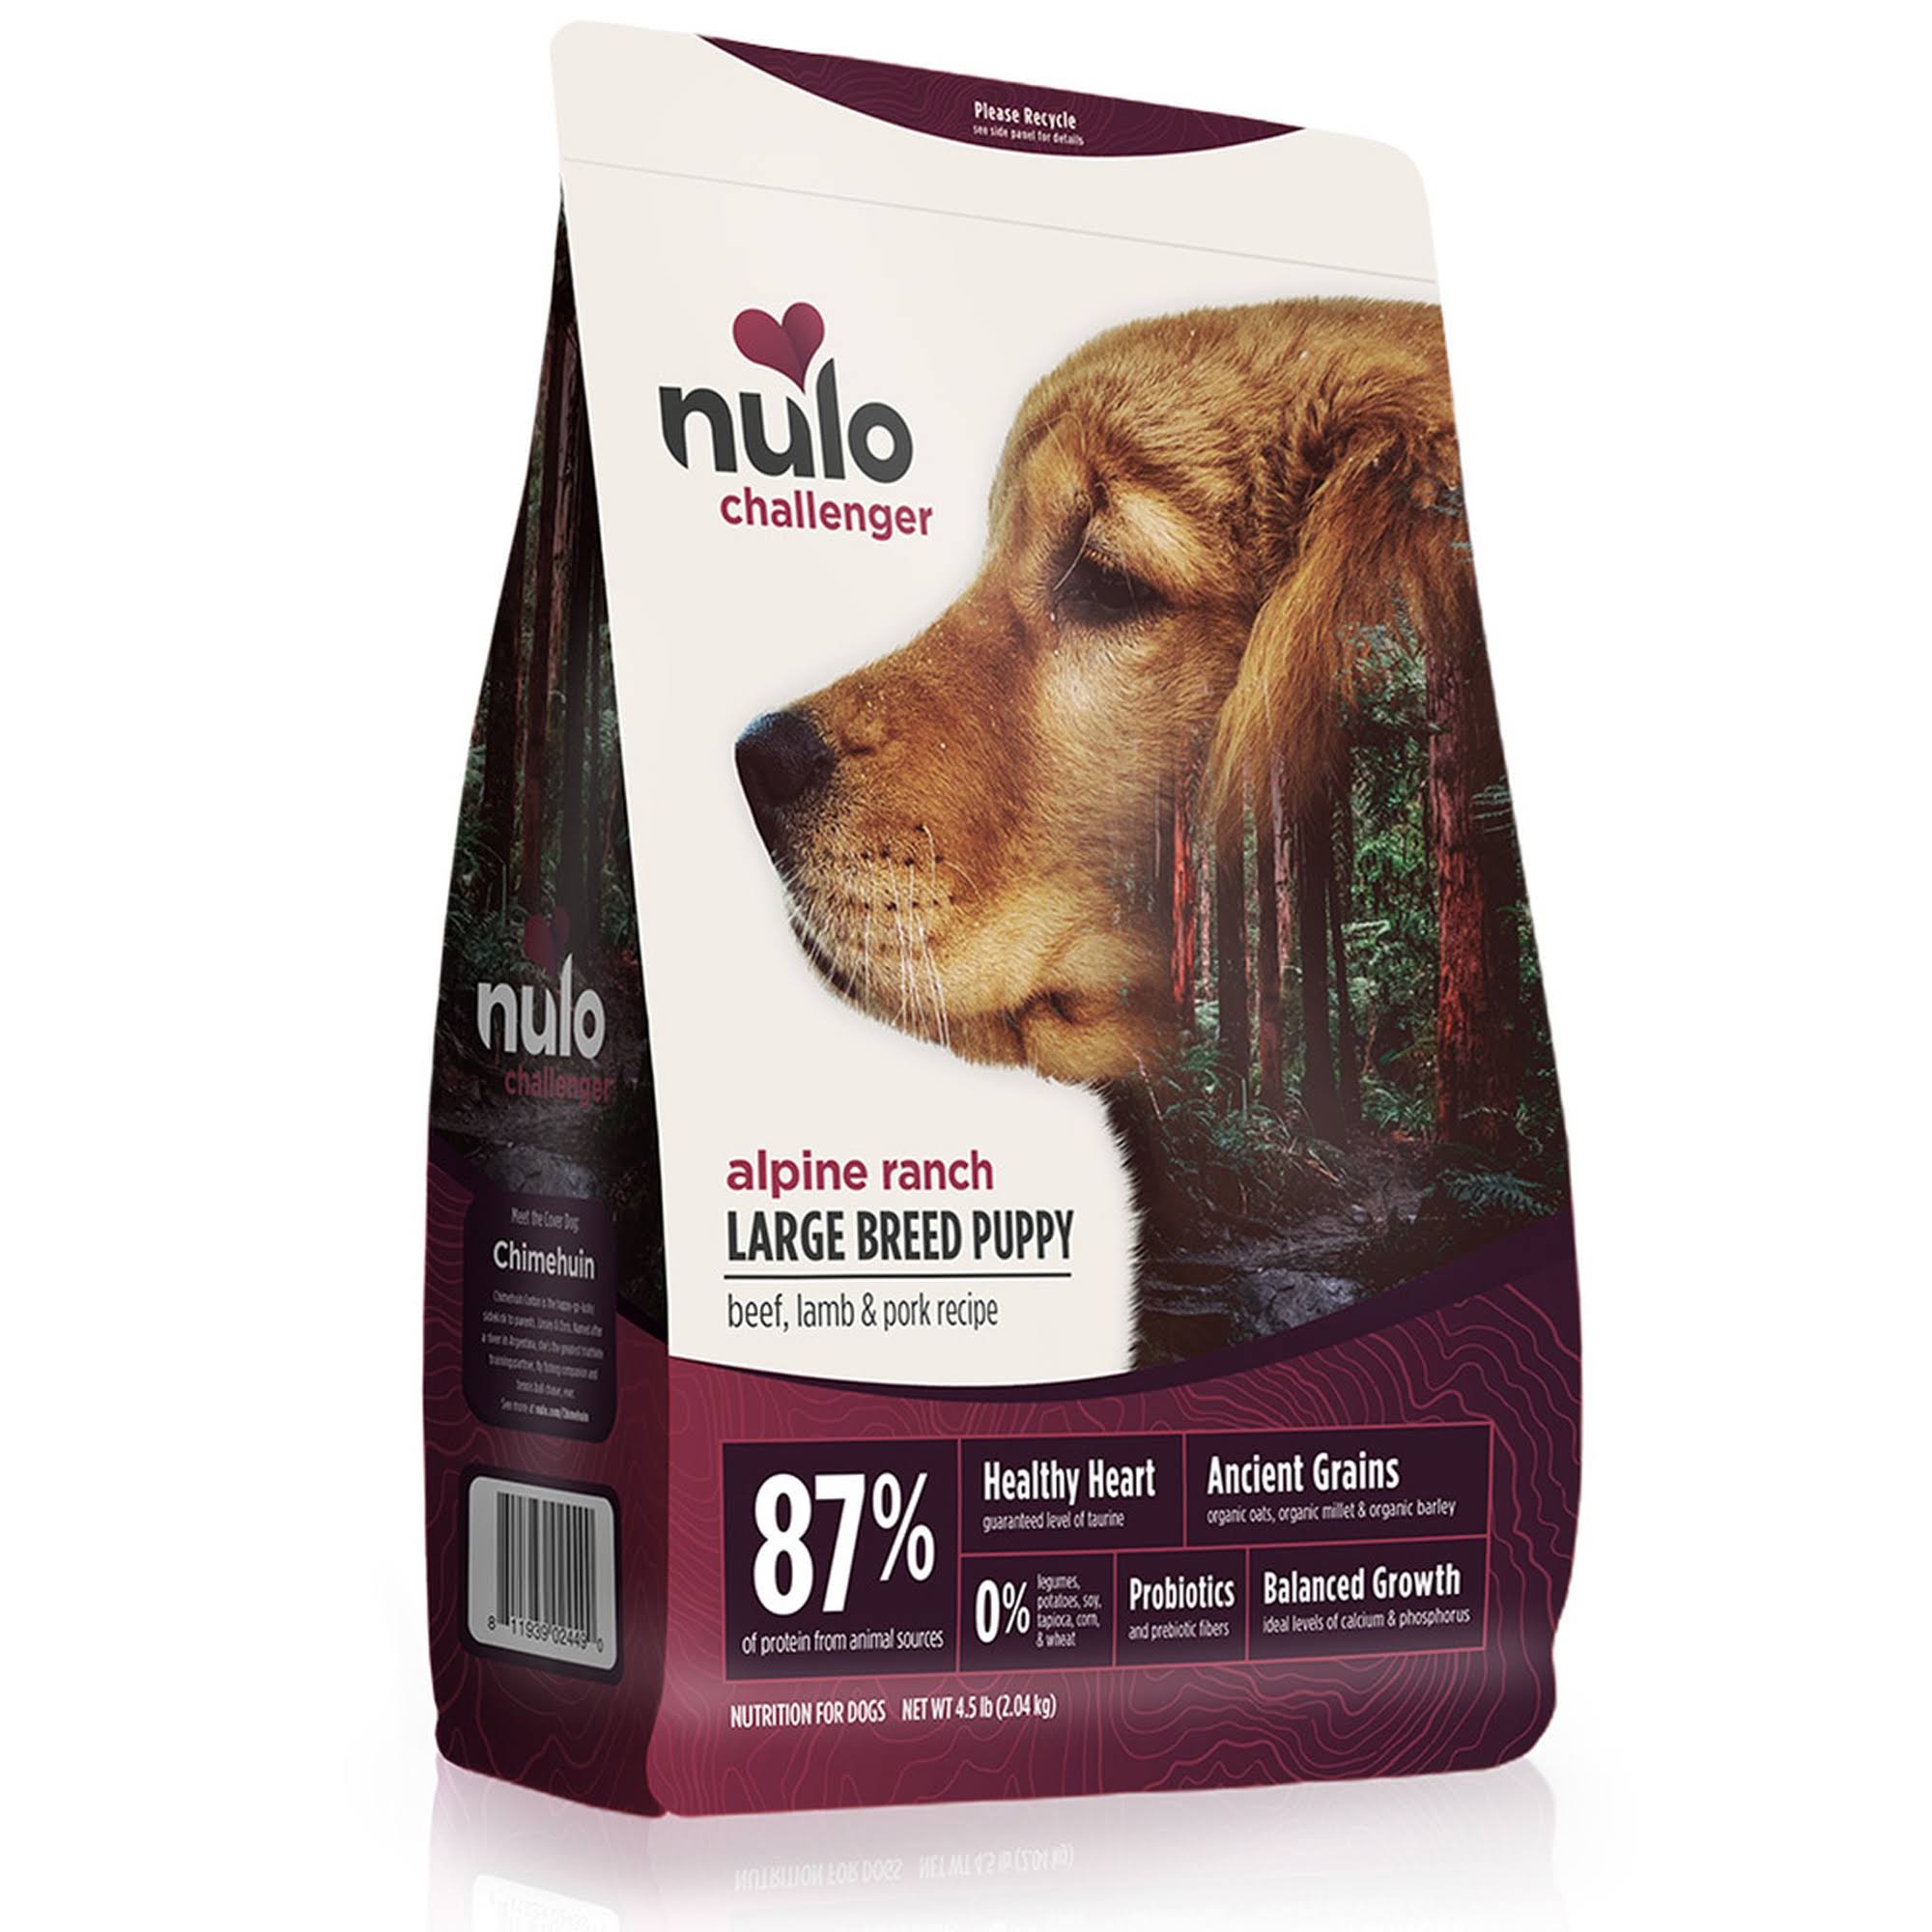 Nulo Challenger Alpine Ranch Beef, Lamb & Pork Large Breed Puppy Food, 24-lb